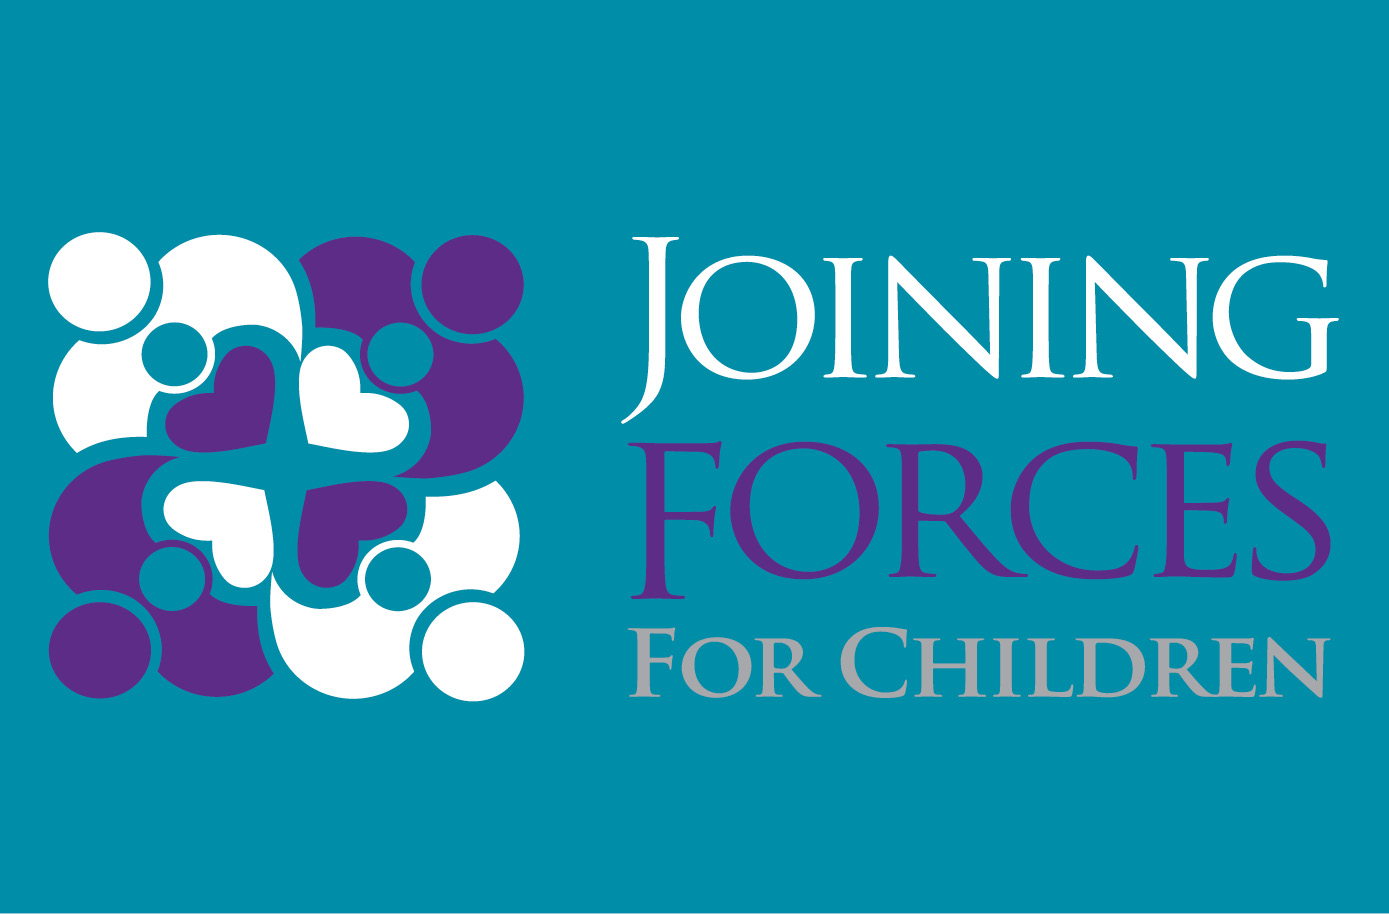 Joining forces for children